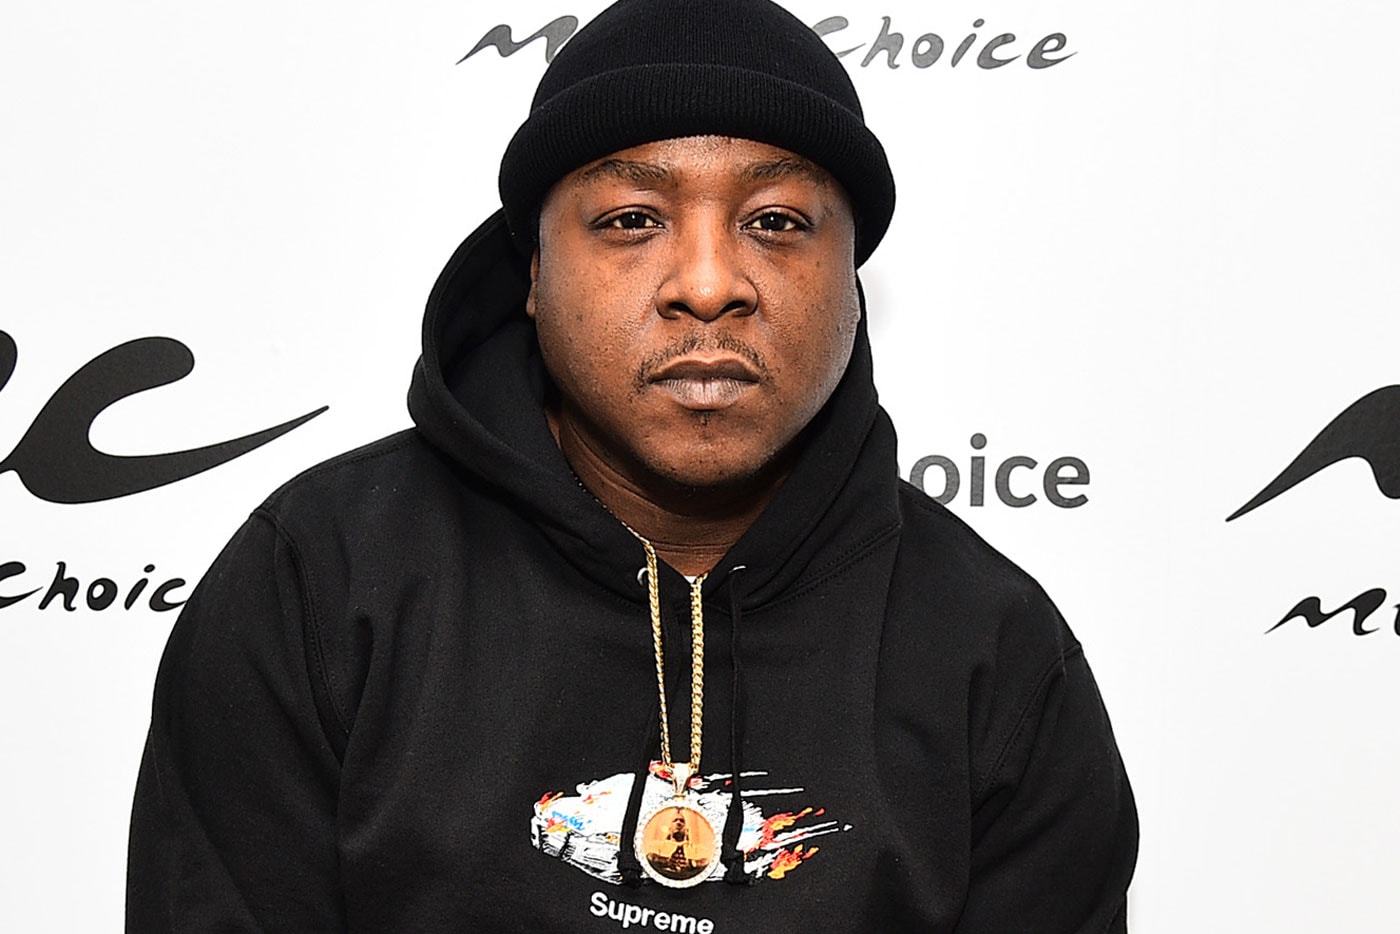 Jadakiss featuring Future - You Can See